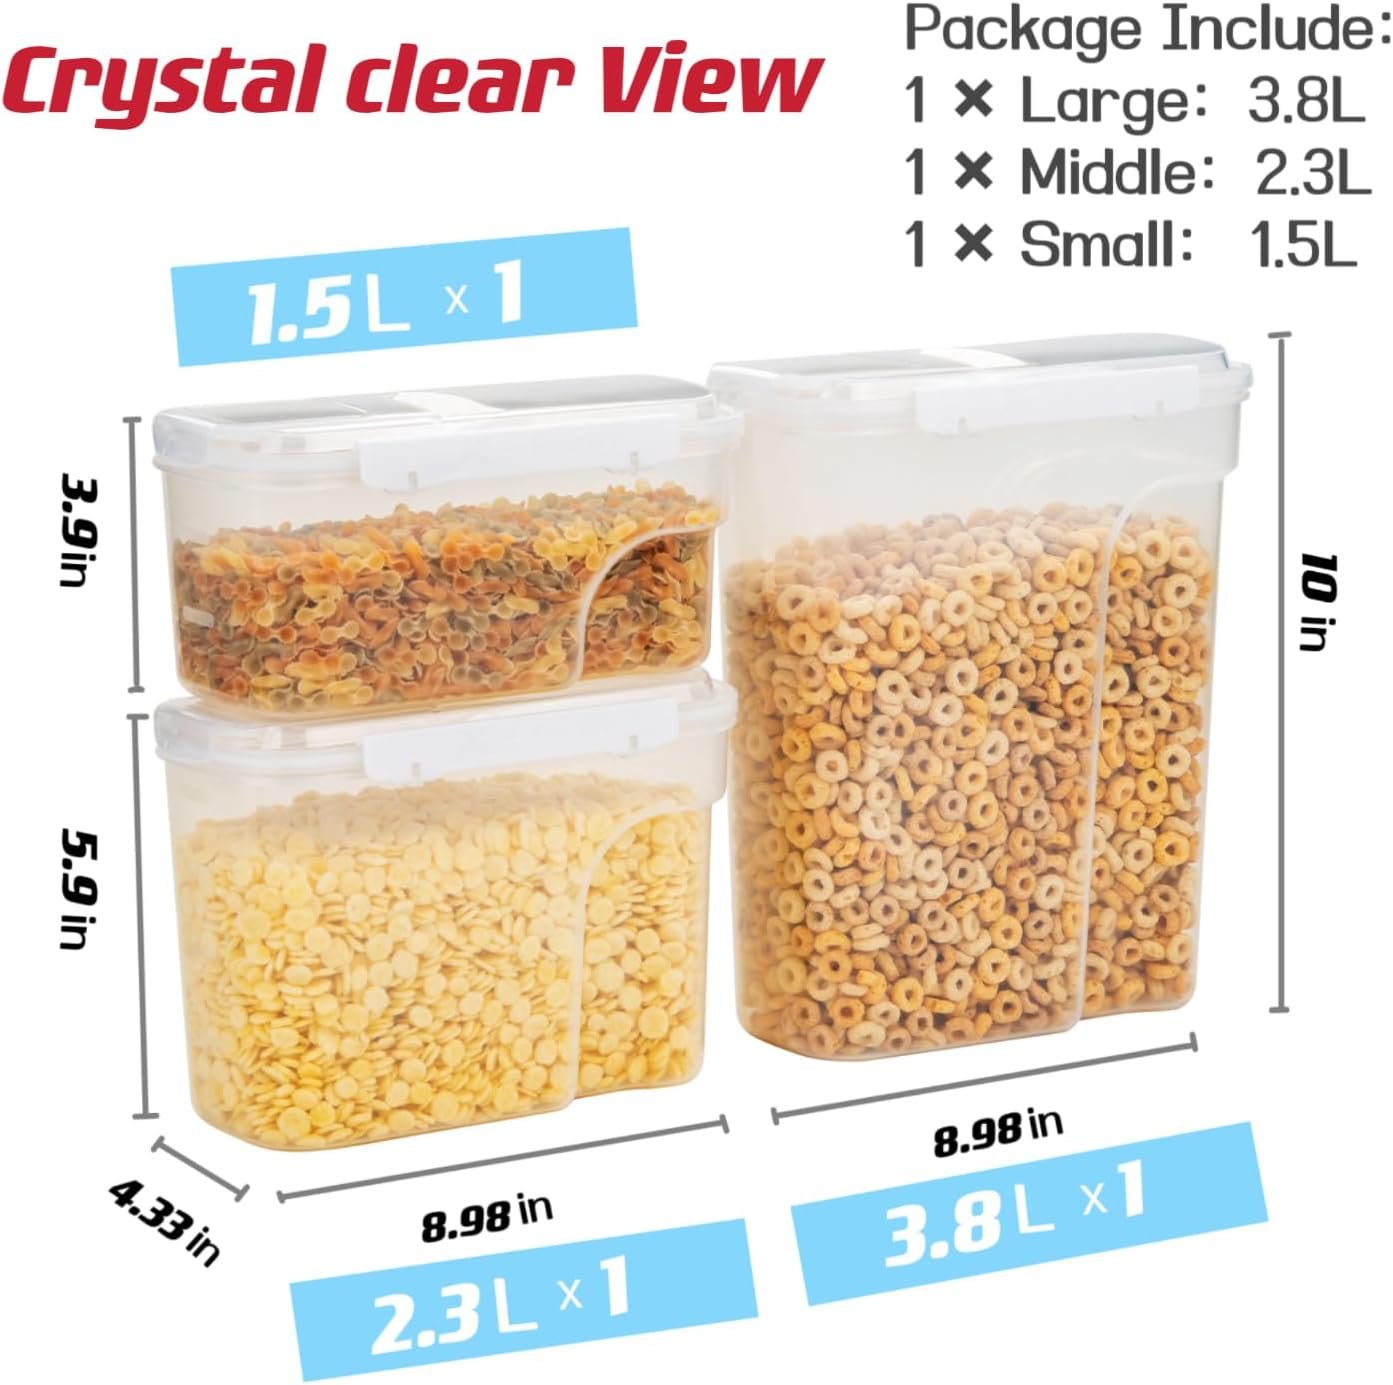 Cereal Containers Storage Review